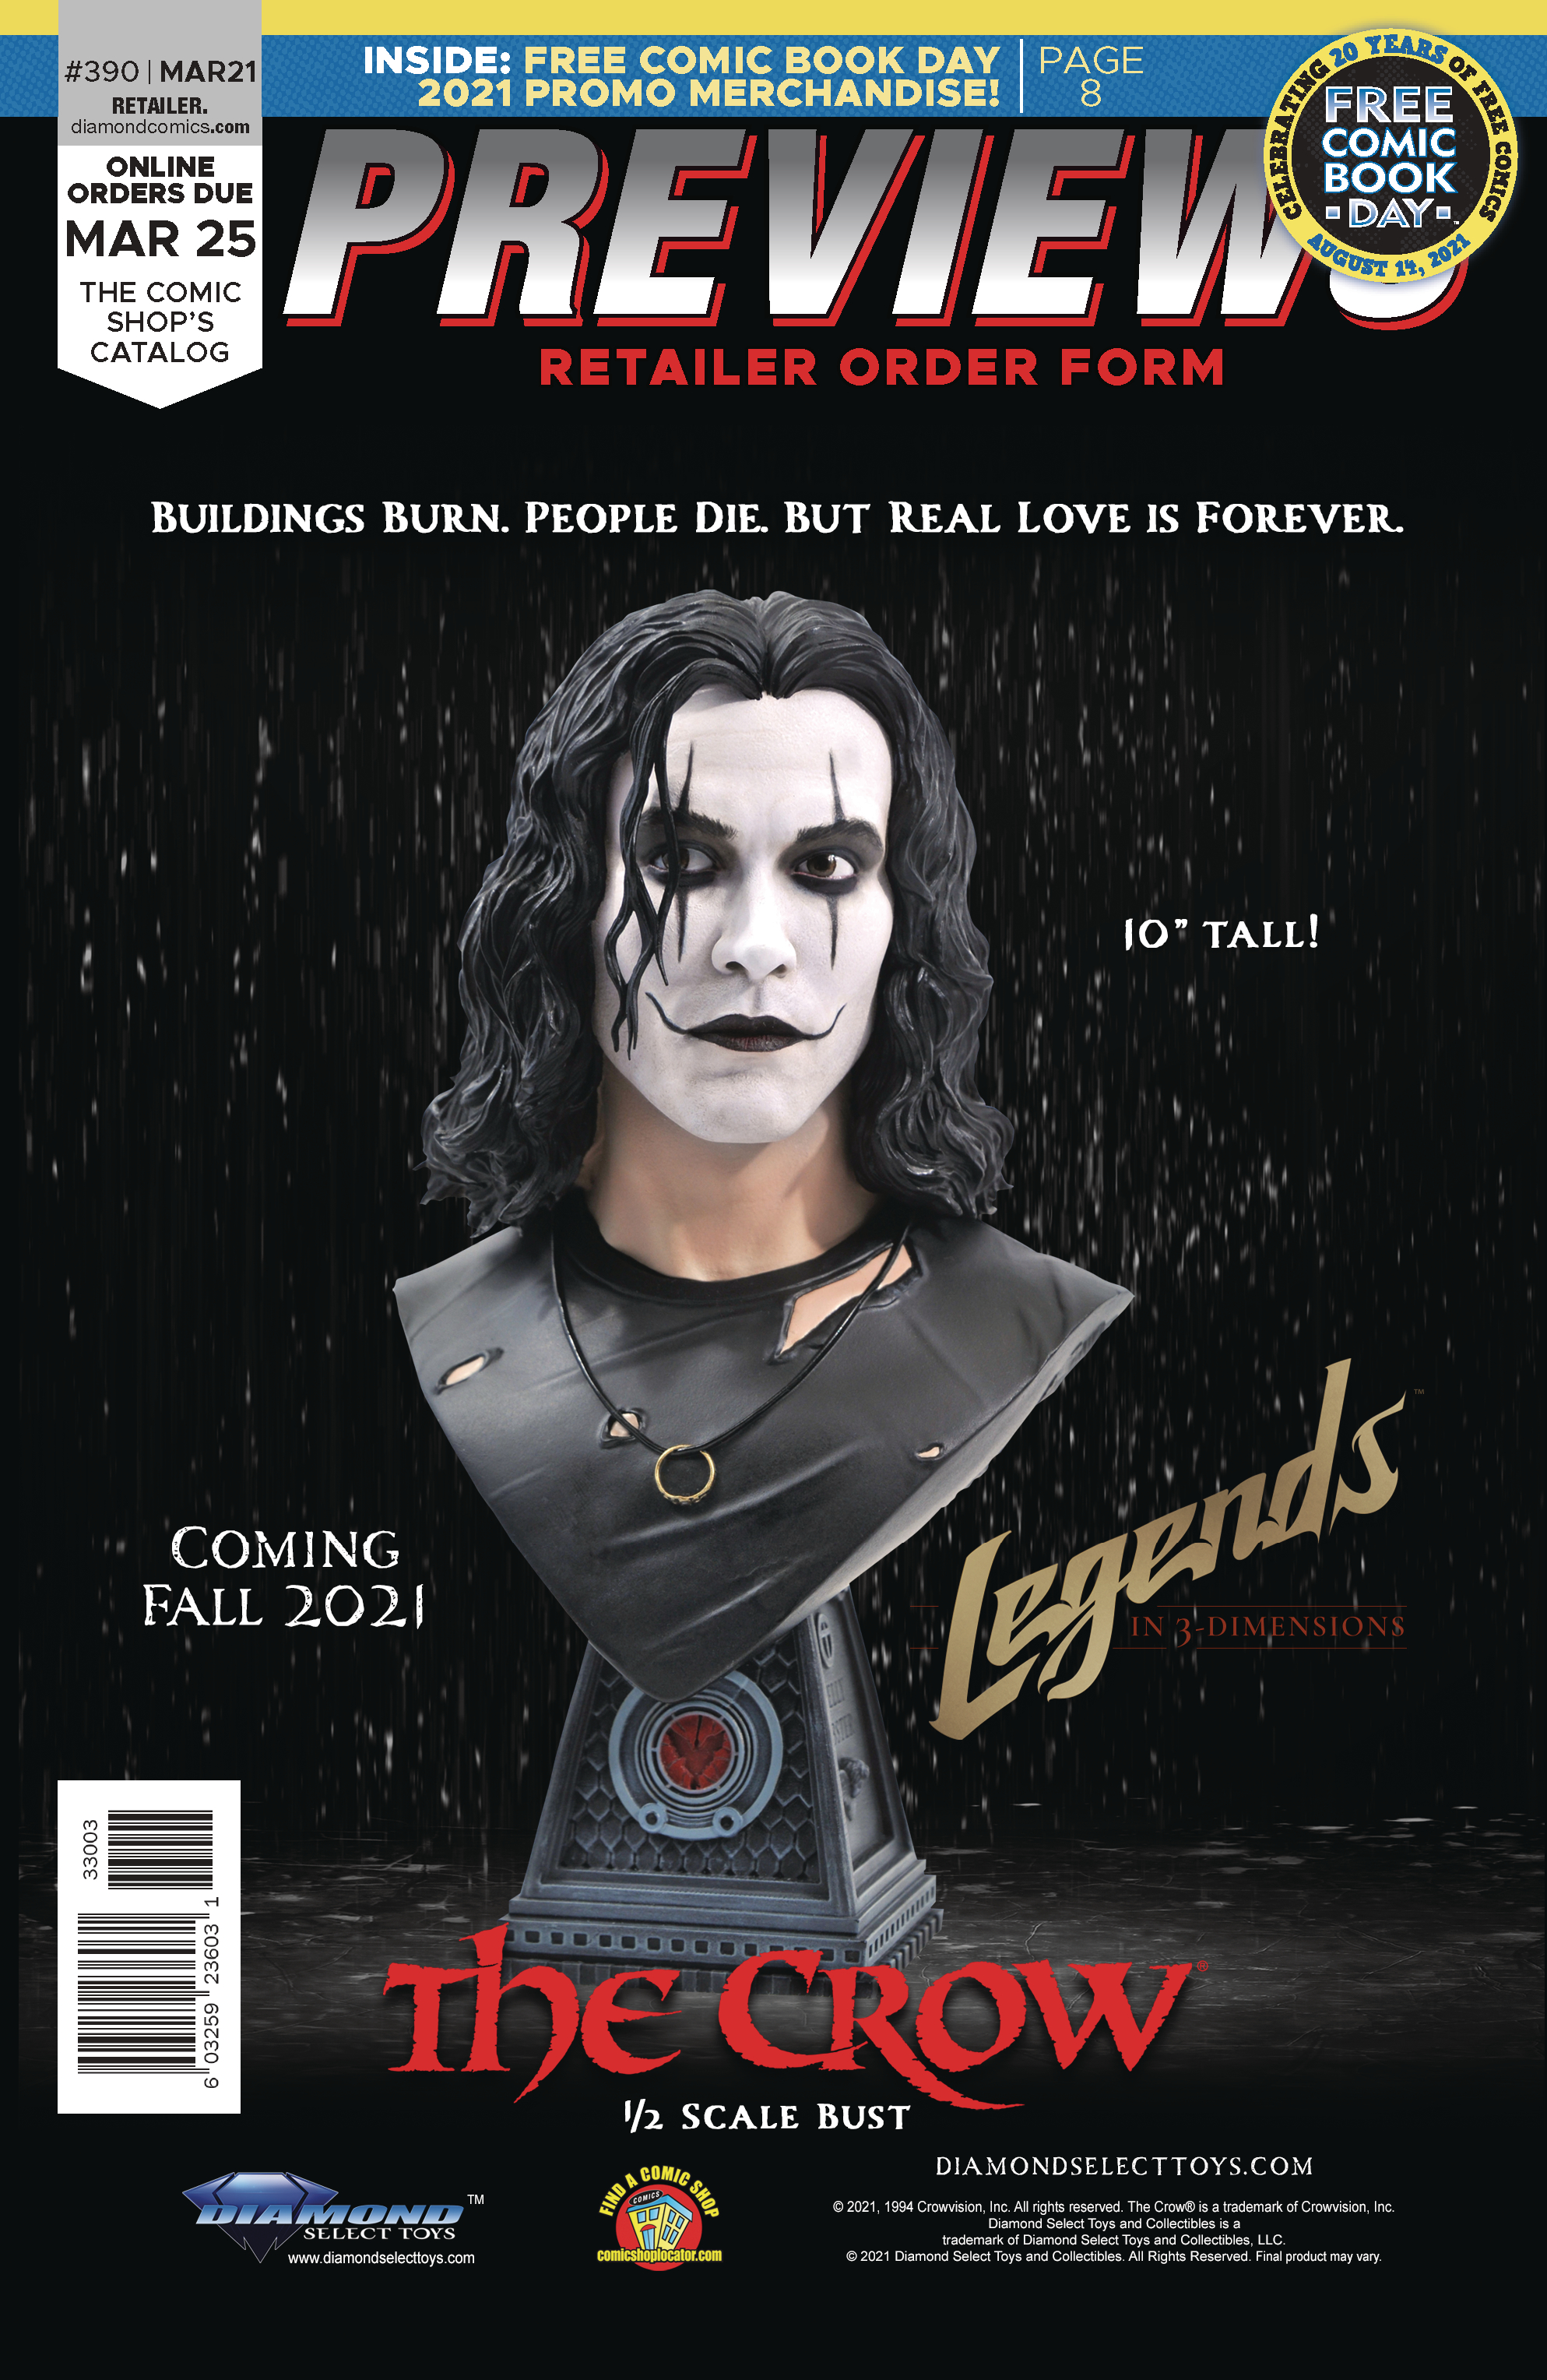 Previews #392 May 2021 Retailer Order Form Extras #392